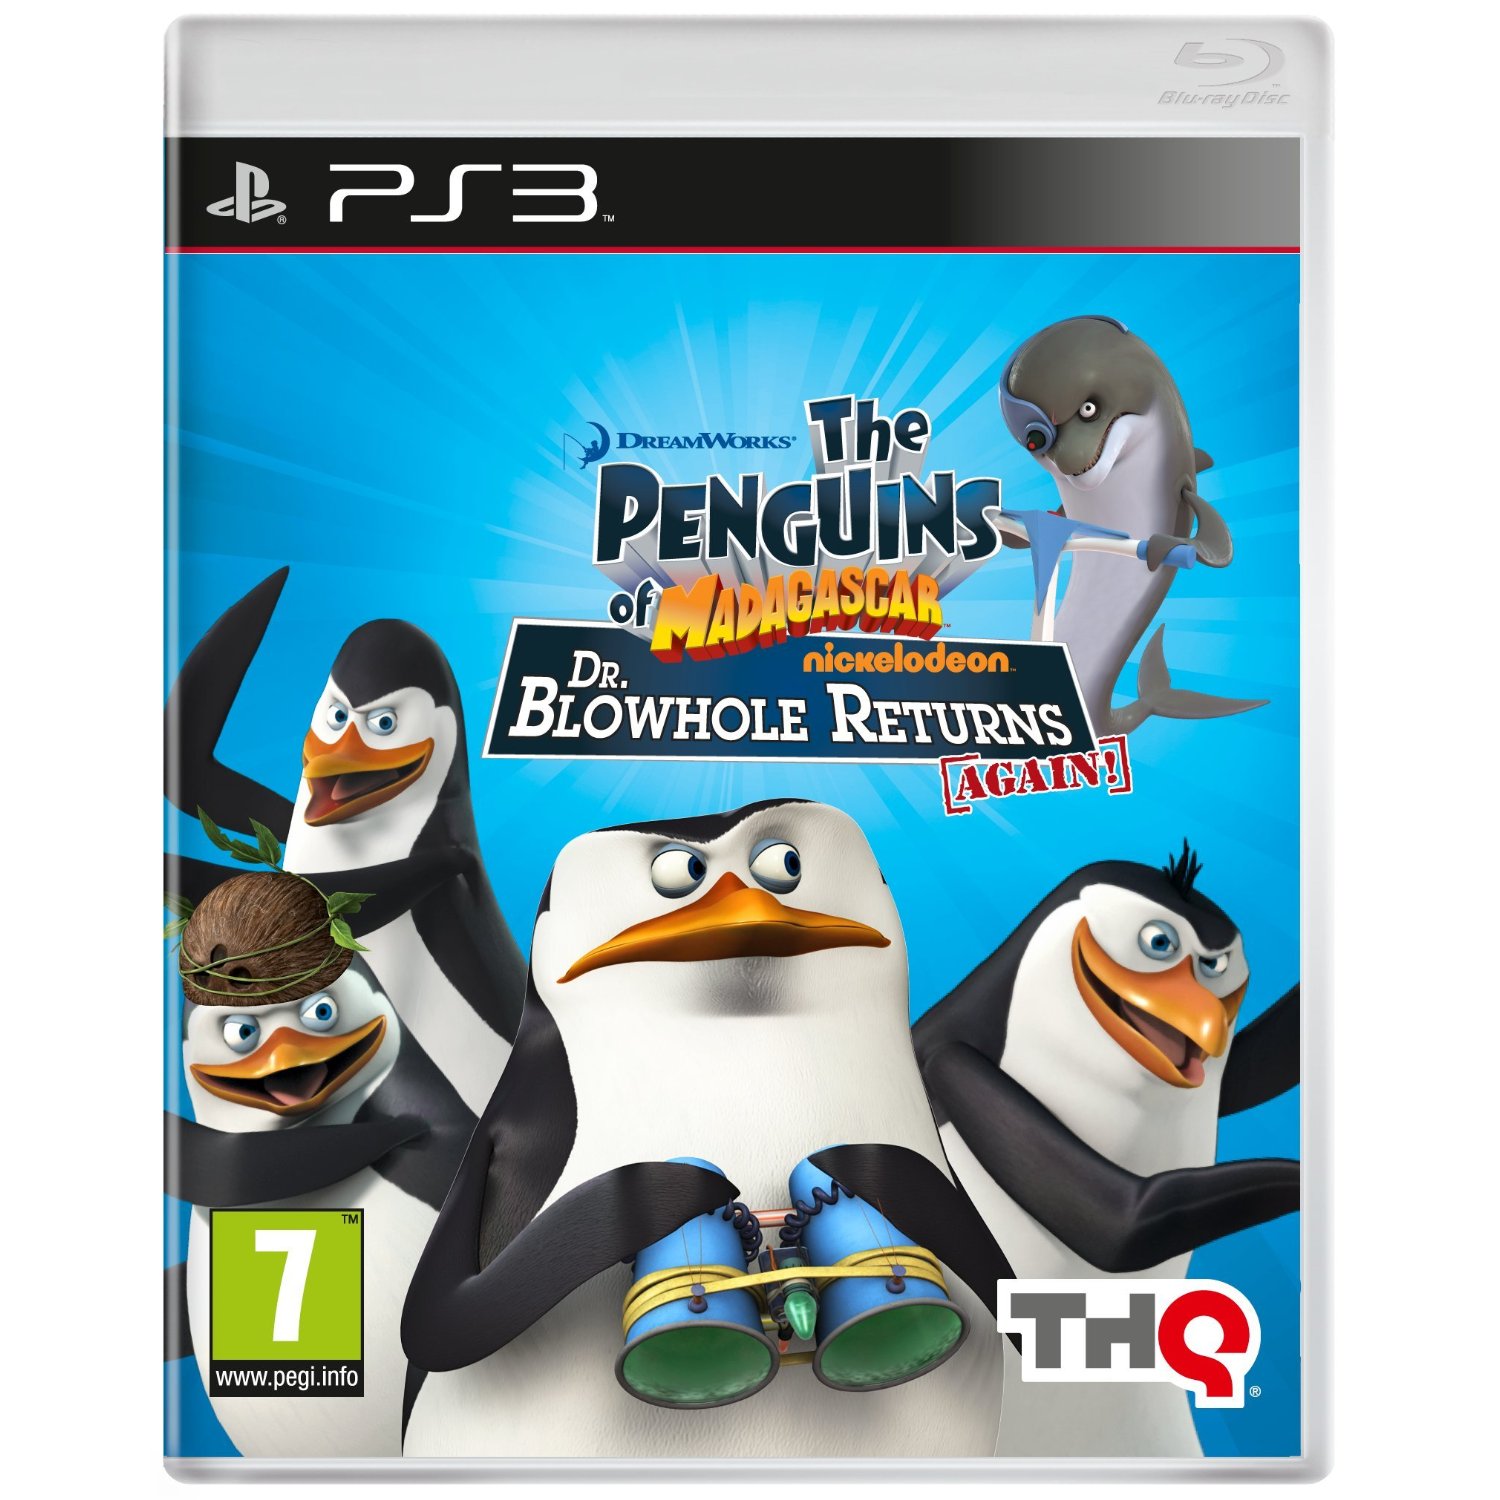 The Penguins of Madagascar Dr Blowhole Returns Again PS3